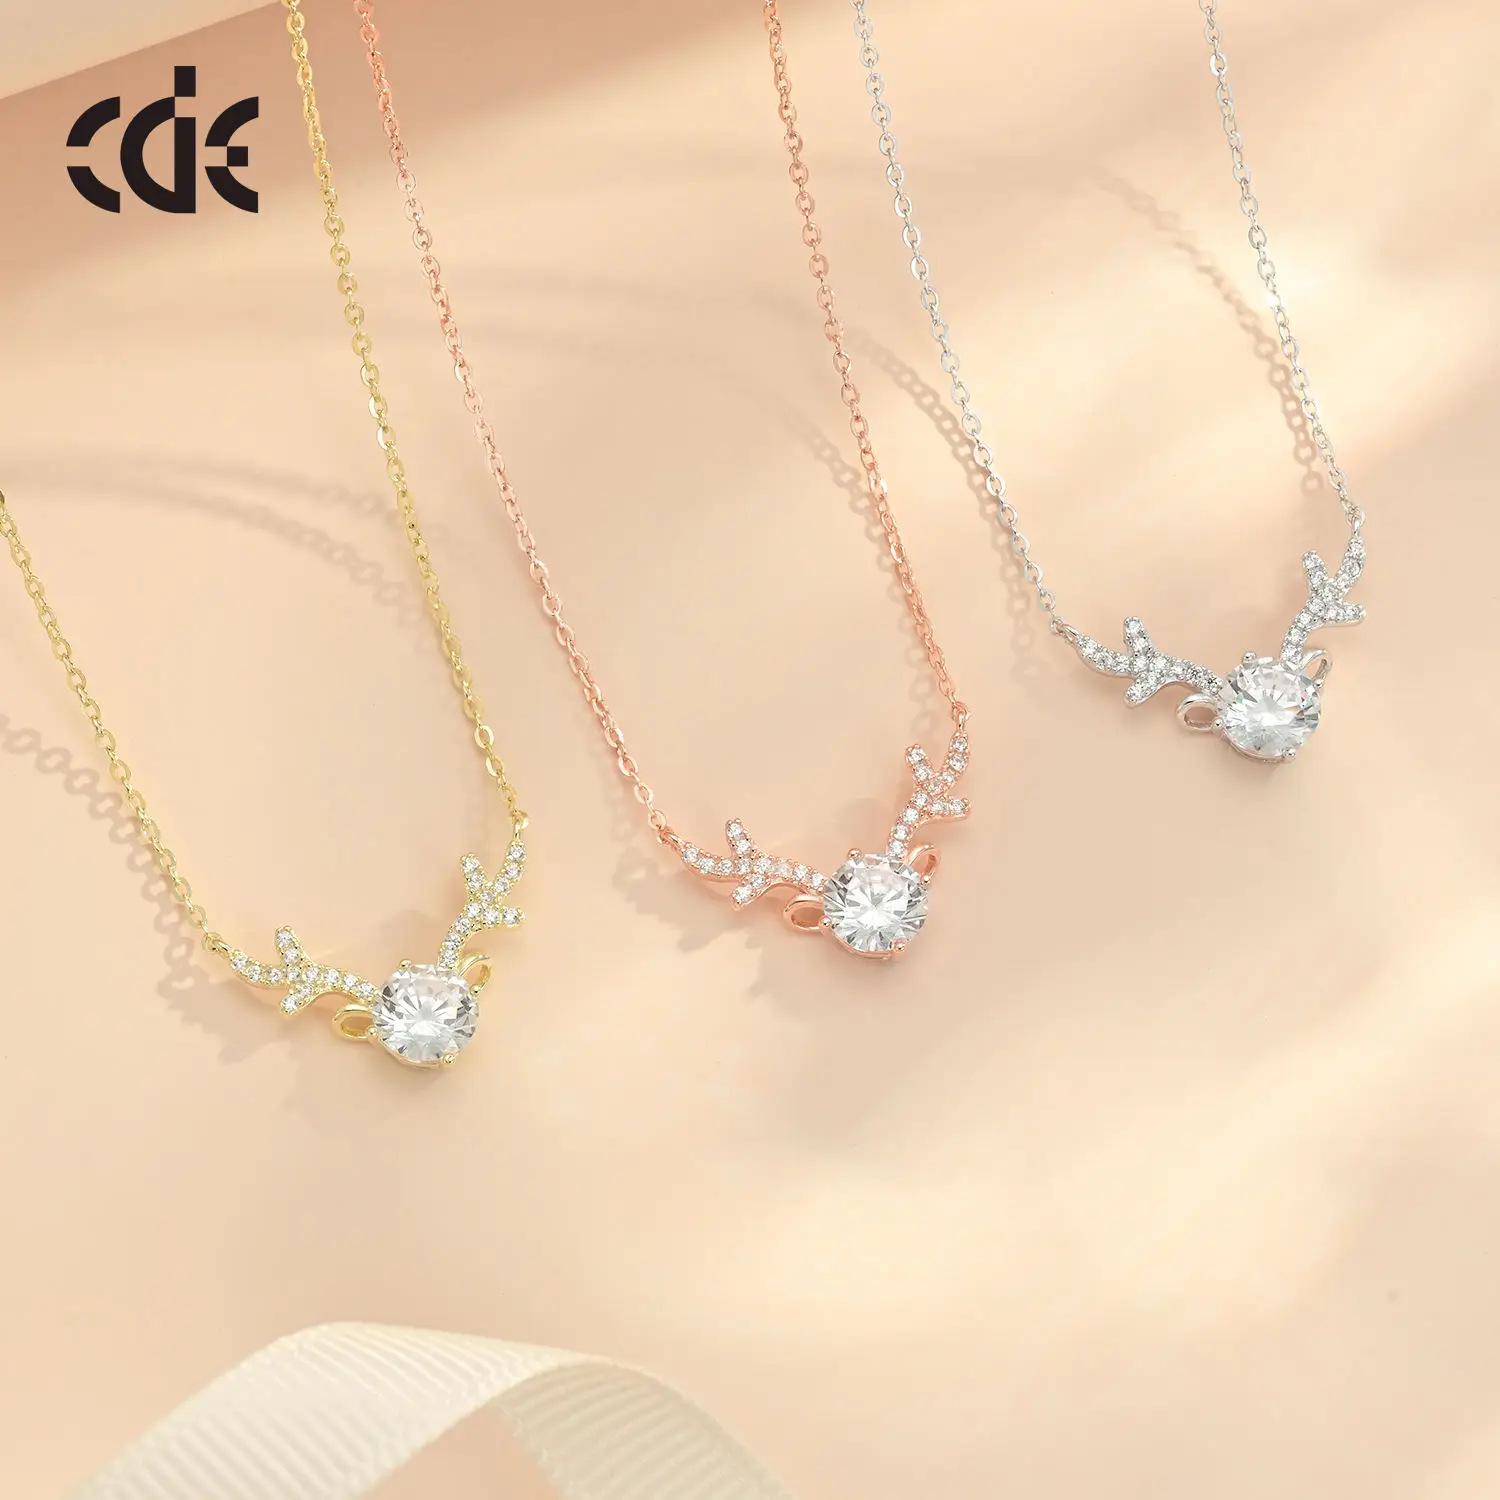 CDE CZYN024 Fine Jewelry Necklace S925 Silver Wholesale Deer 14K Gold Plated Christmas Gift Pendant Necklace